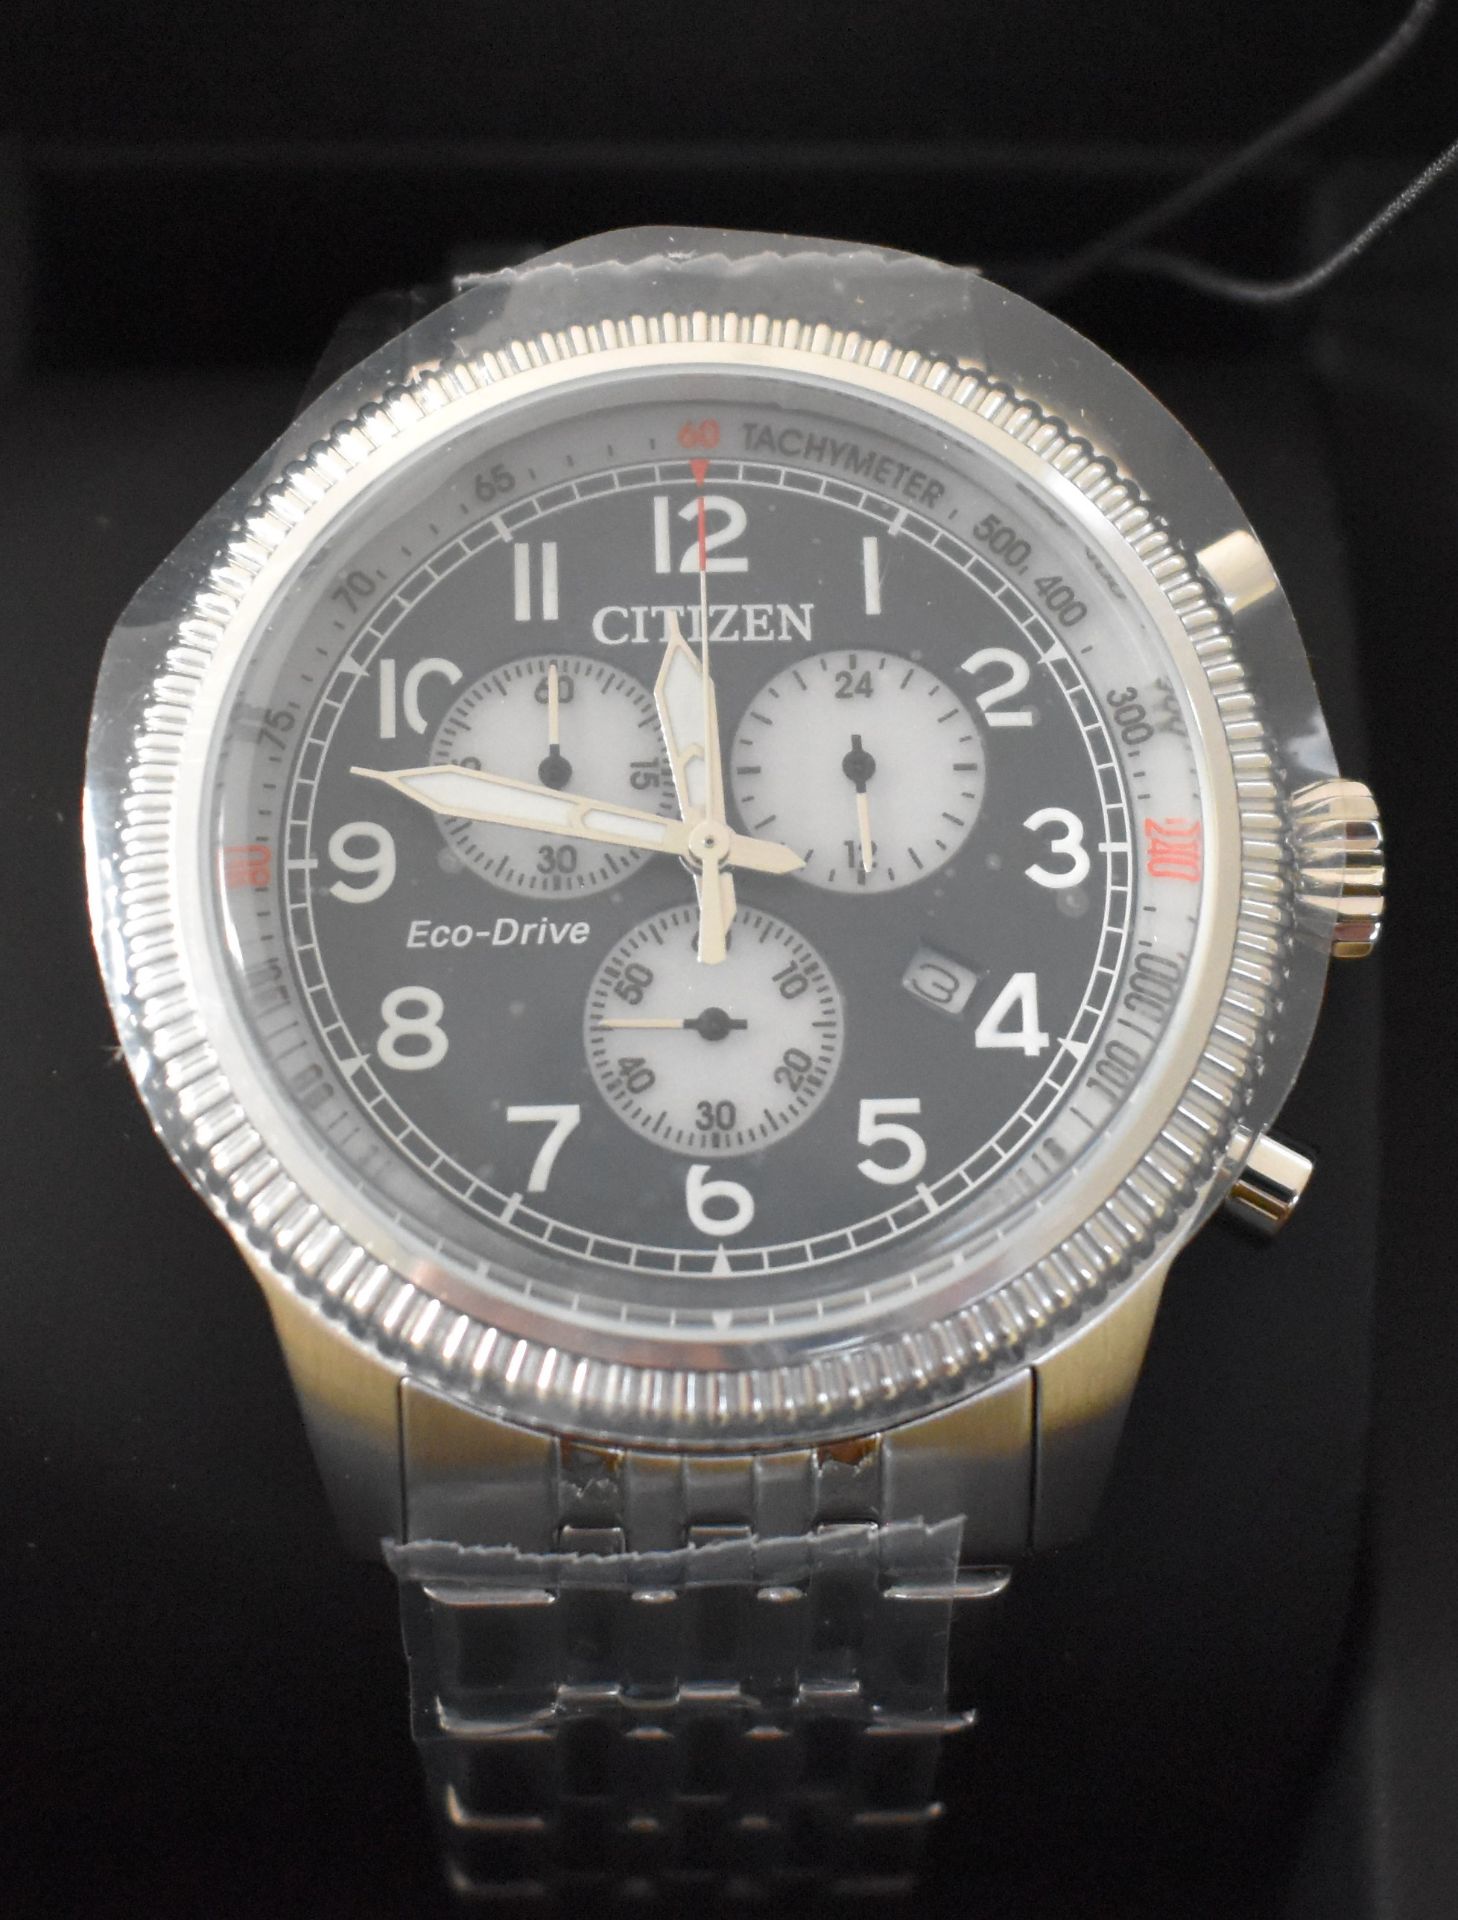 Citizen Men's Watch AT2460-89L - Image 2 of 2